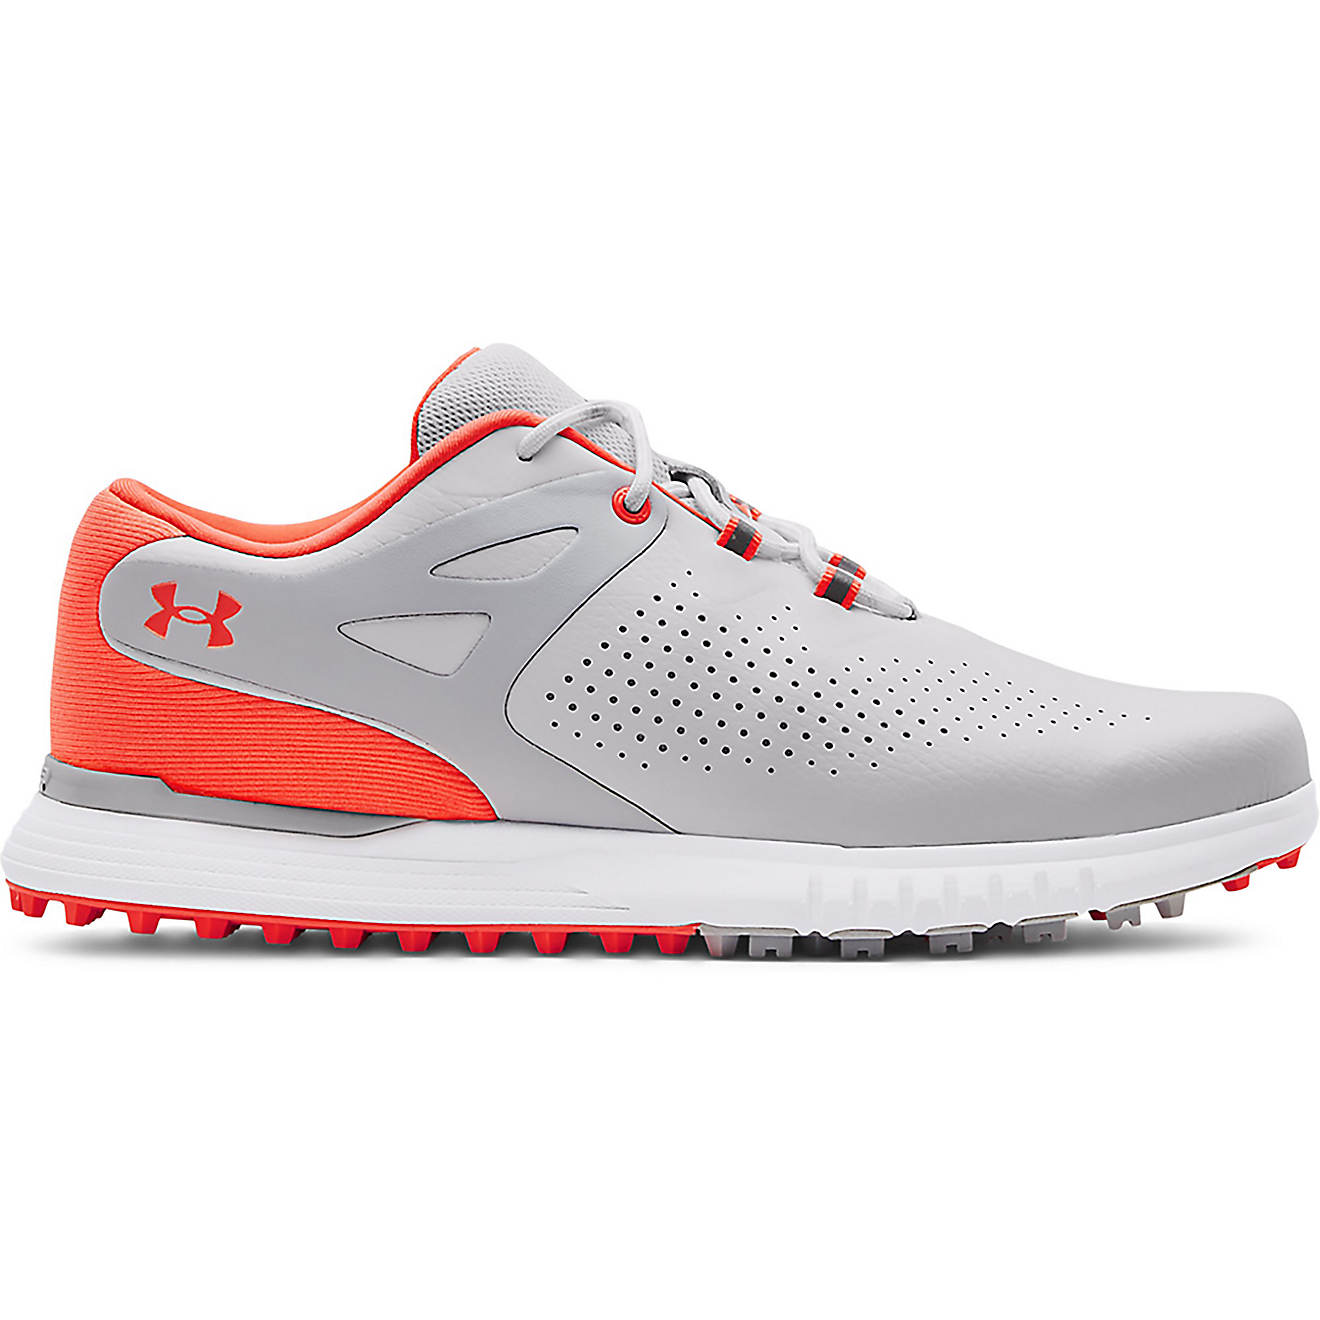 Under Armour Women's Charged Breathe Spikeless Golf Shoes | Academy